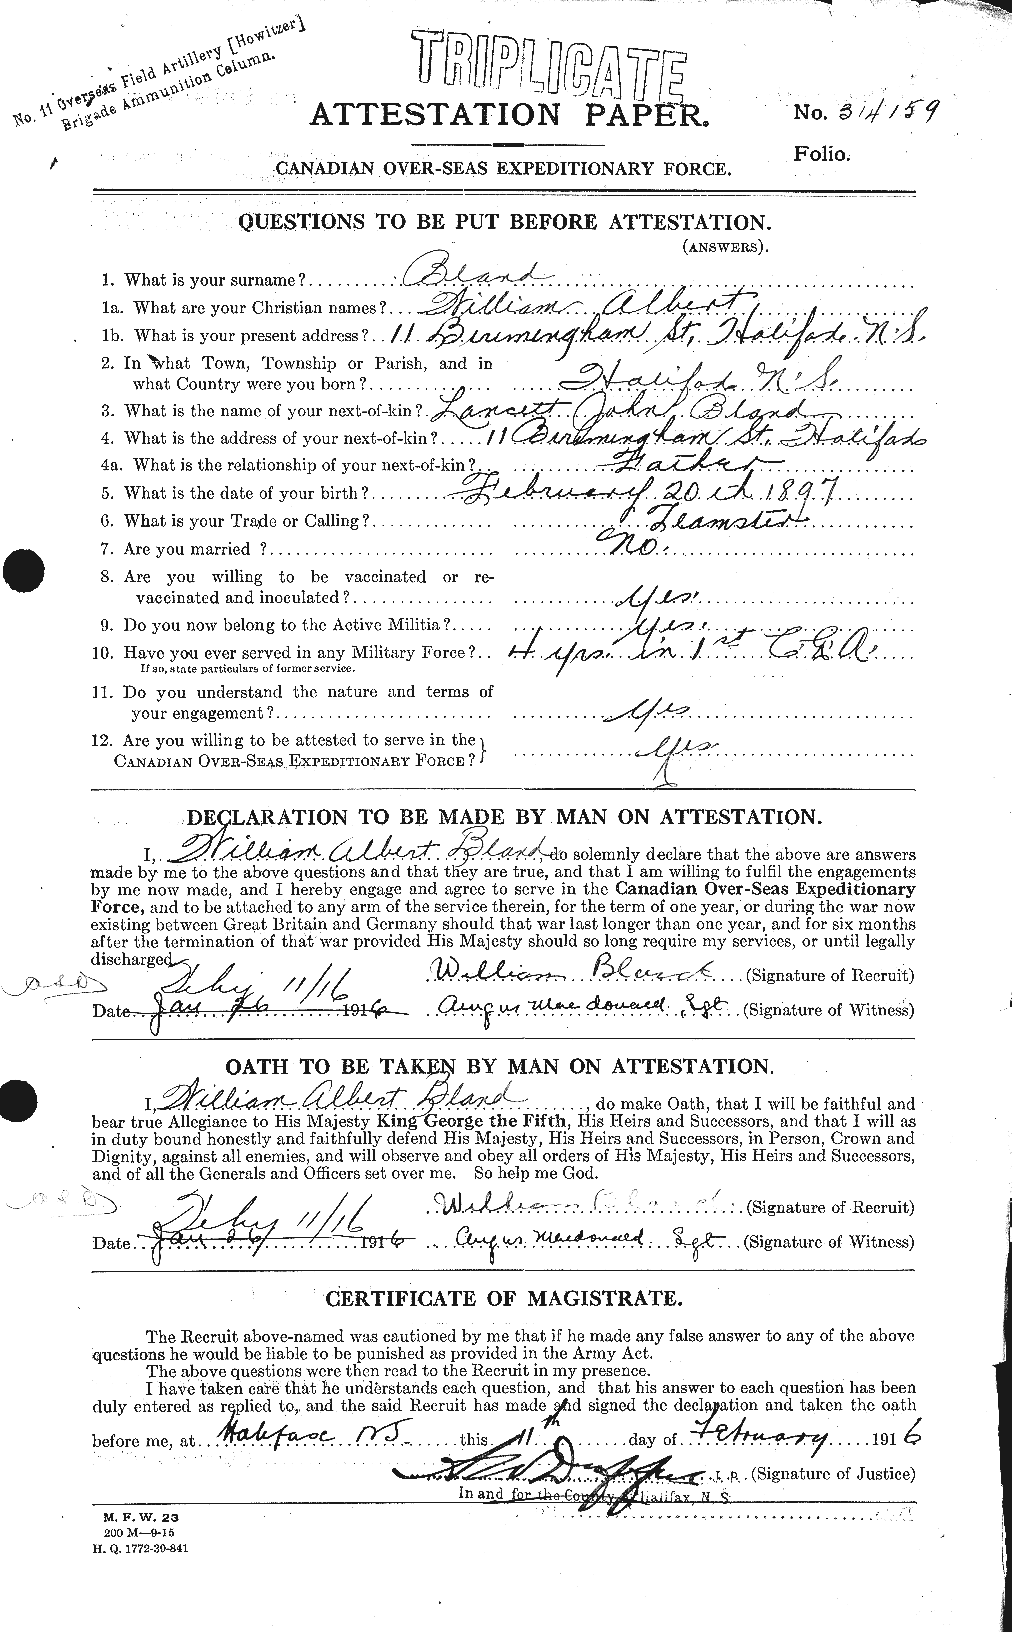 Personnel Records of the First World War - CEF 240666a